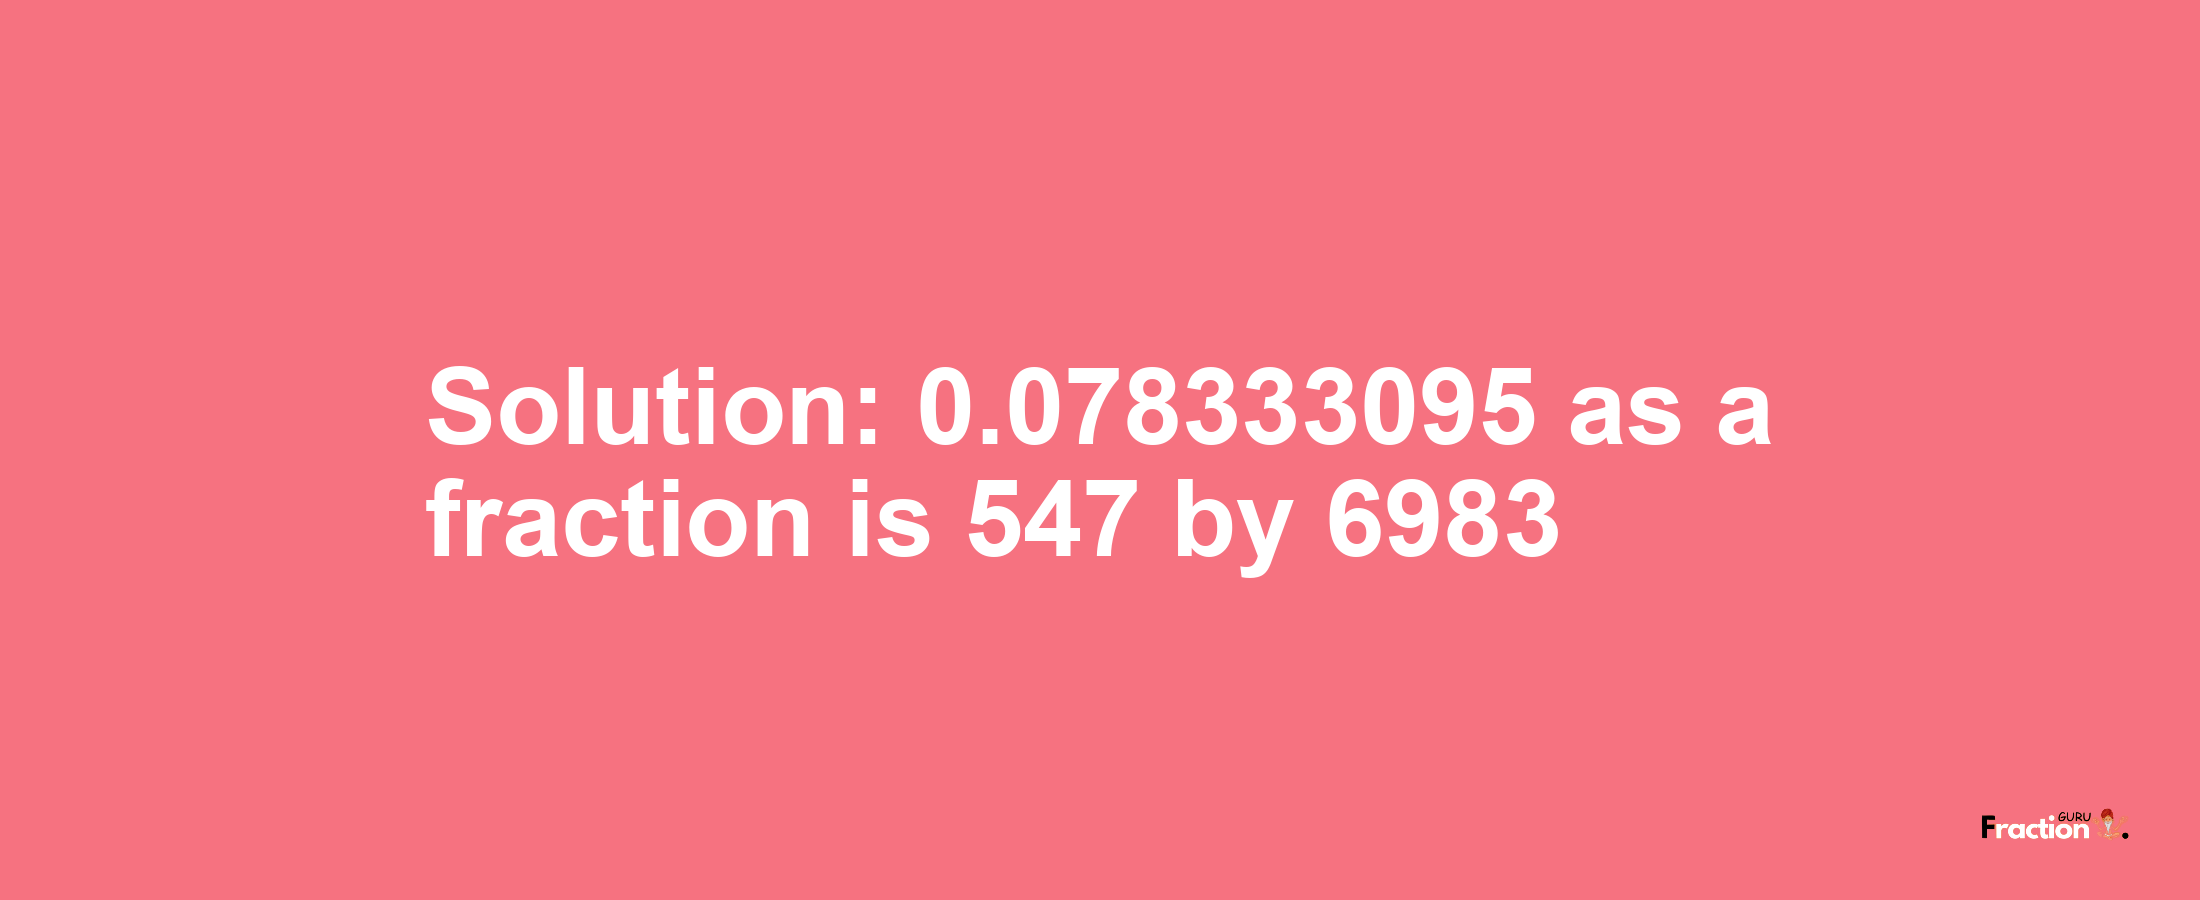 Solution:0.078333095 as a fraction is 547/6983